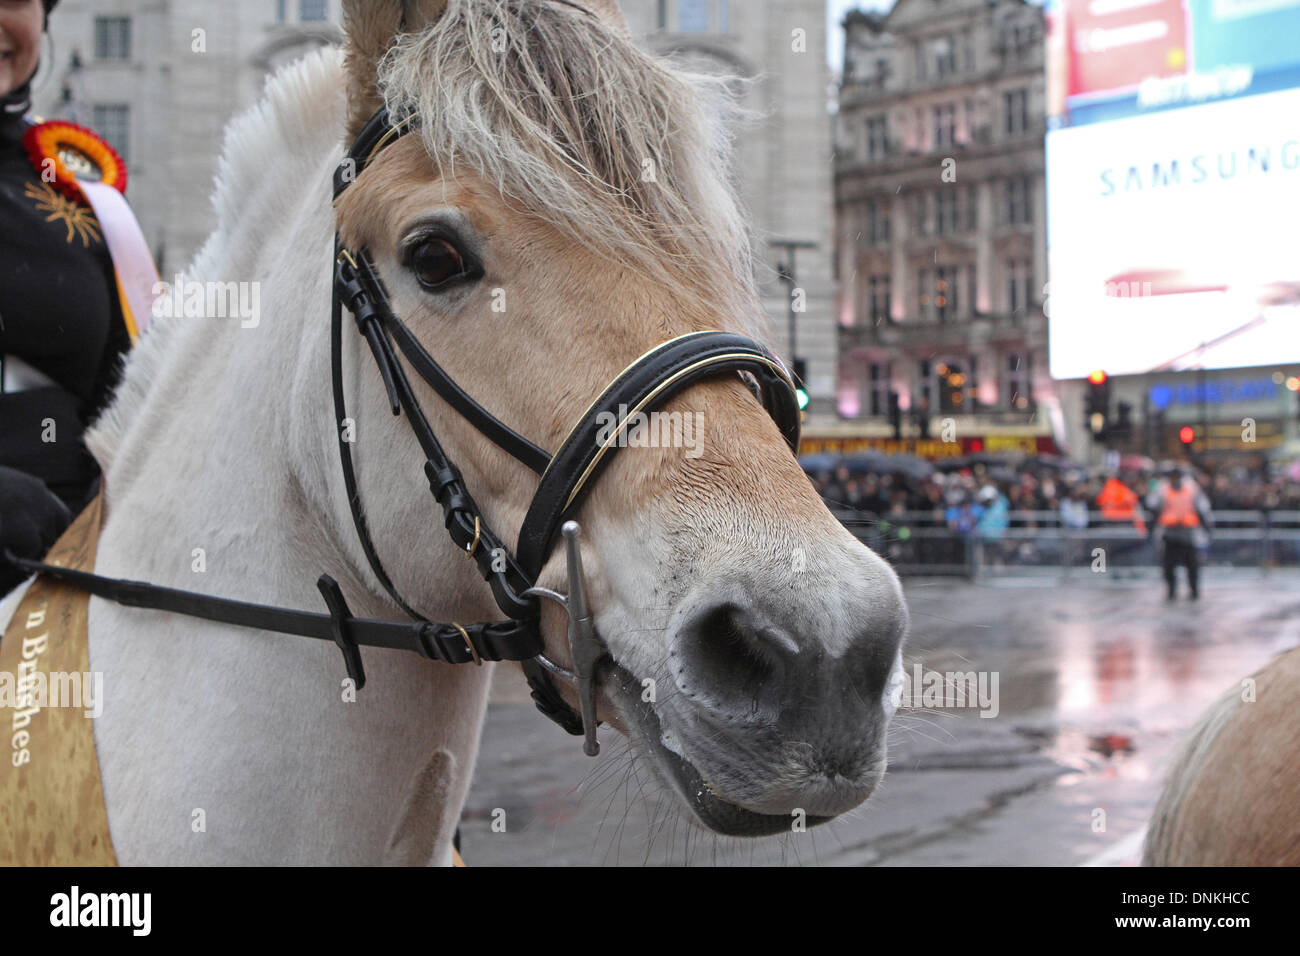 London,UK,1er janvier 2014,Chevaux rejoint le London's New Year's Day Parade 2014 Credit : Keith Larby/Alamy Live News Banque D'Images